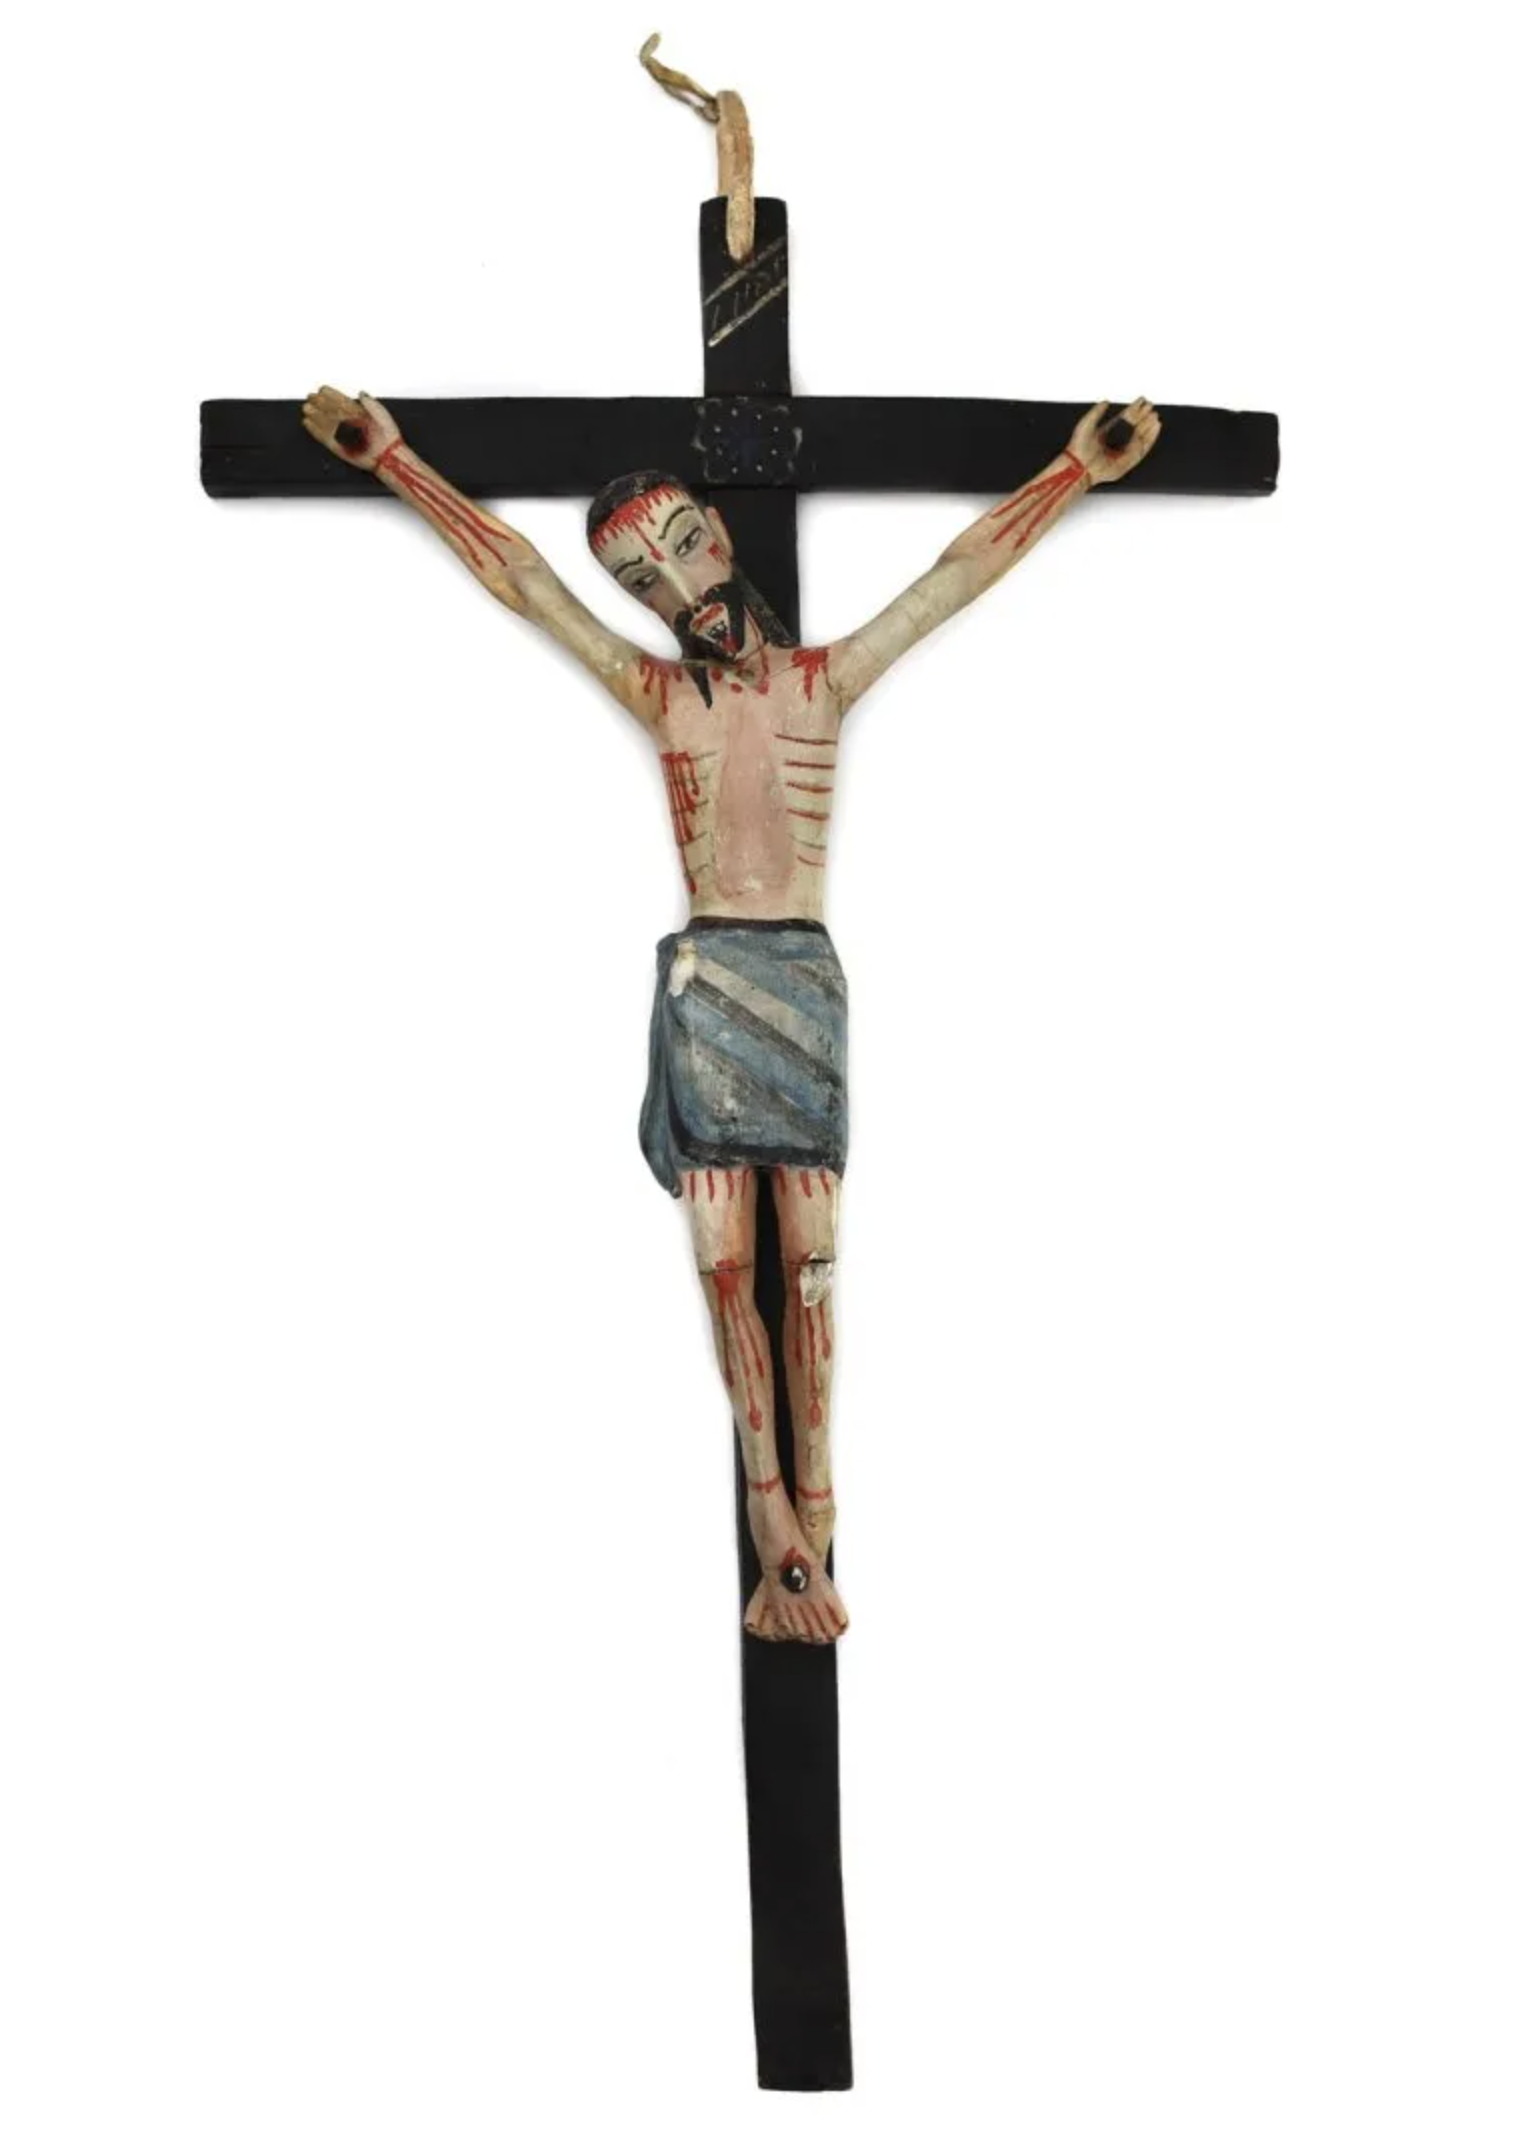 New Mexican Hand-Carved Wooden Crucifix Bulto c. 1840s